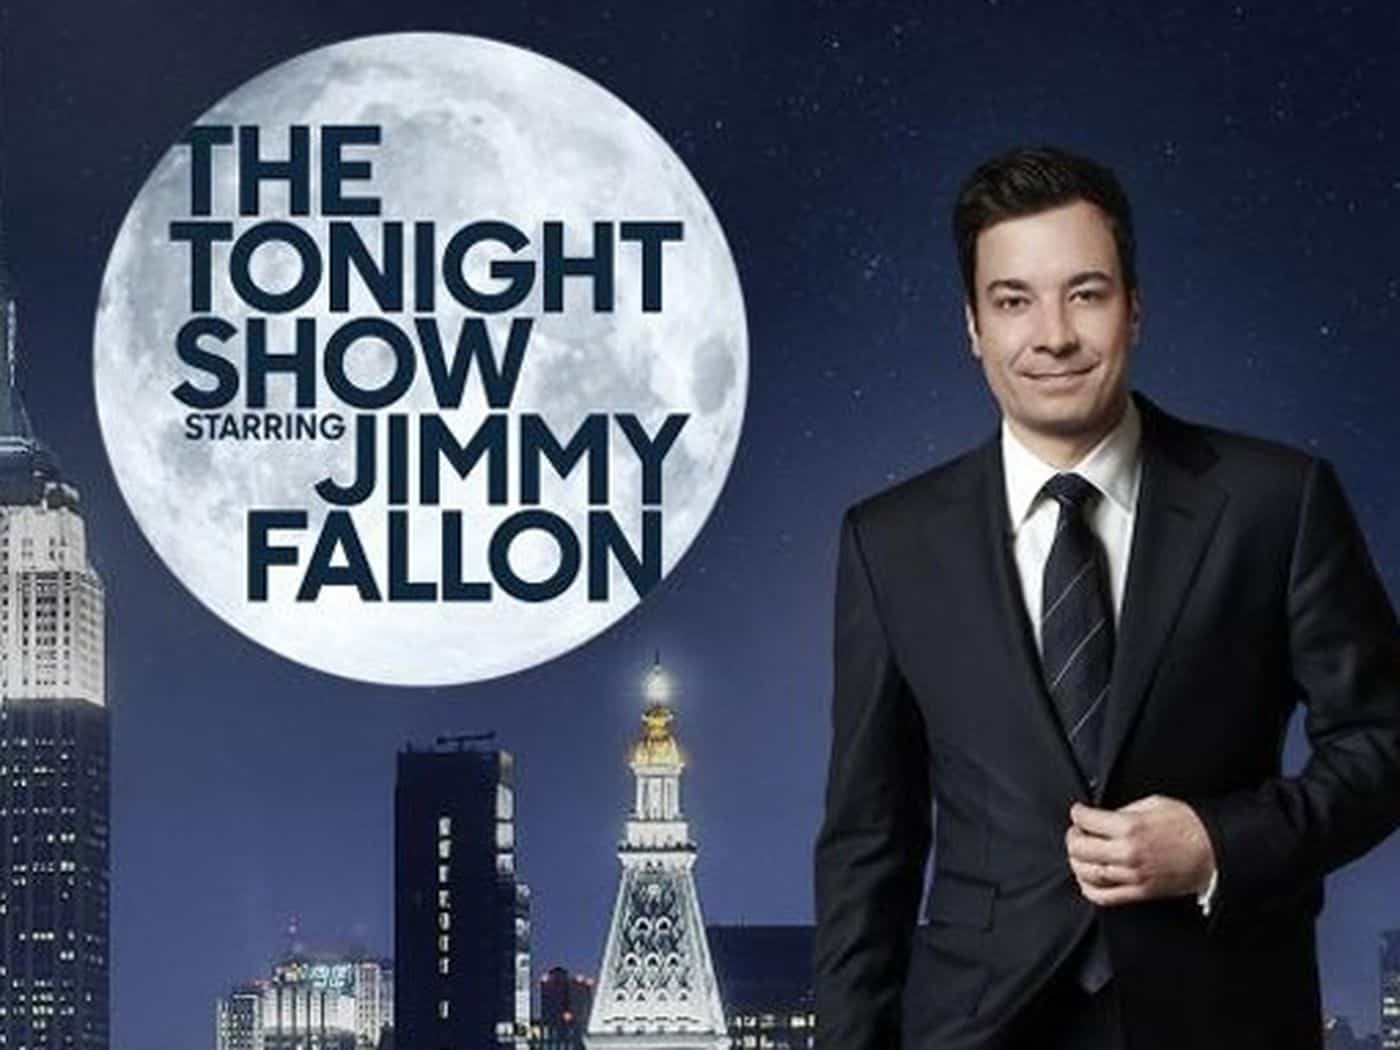 The Late Show with Jimmy Fallon